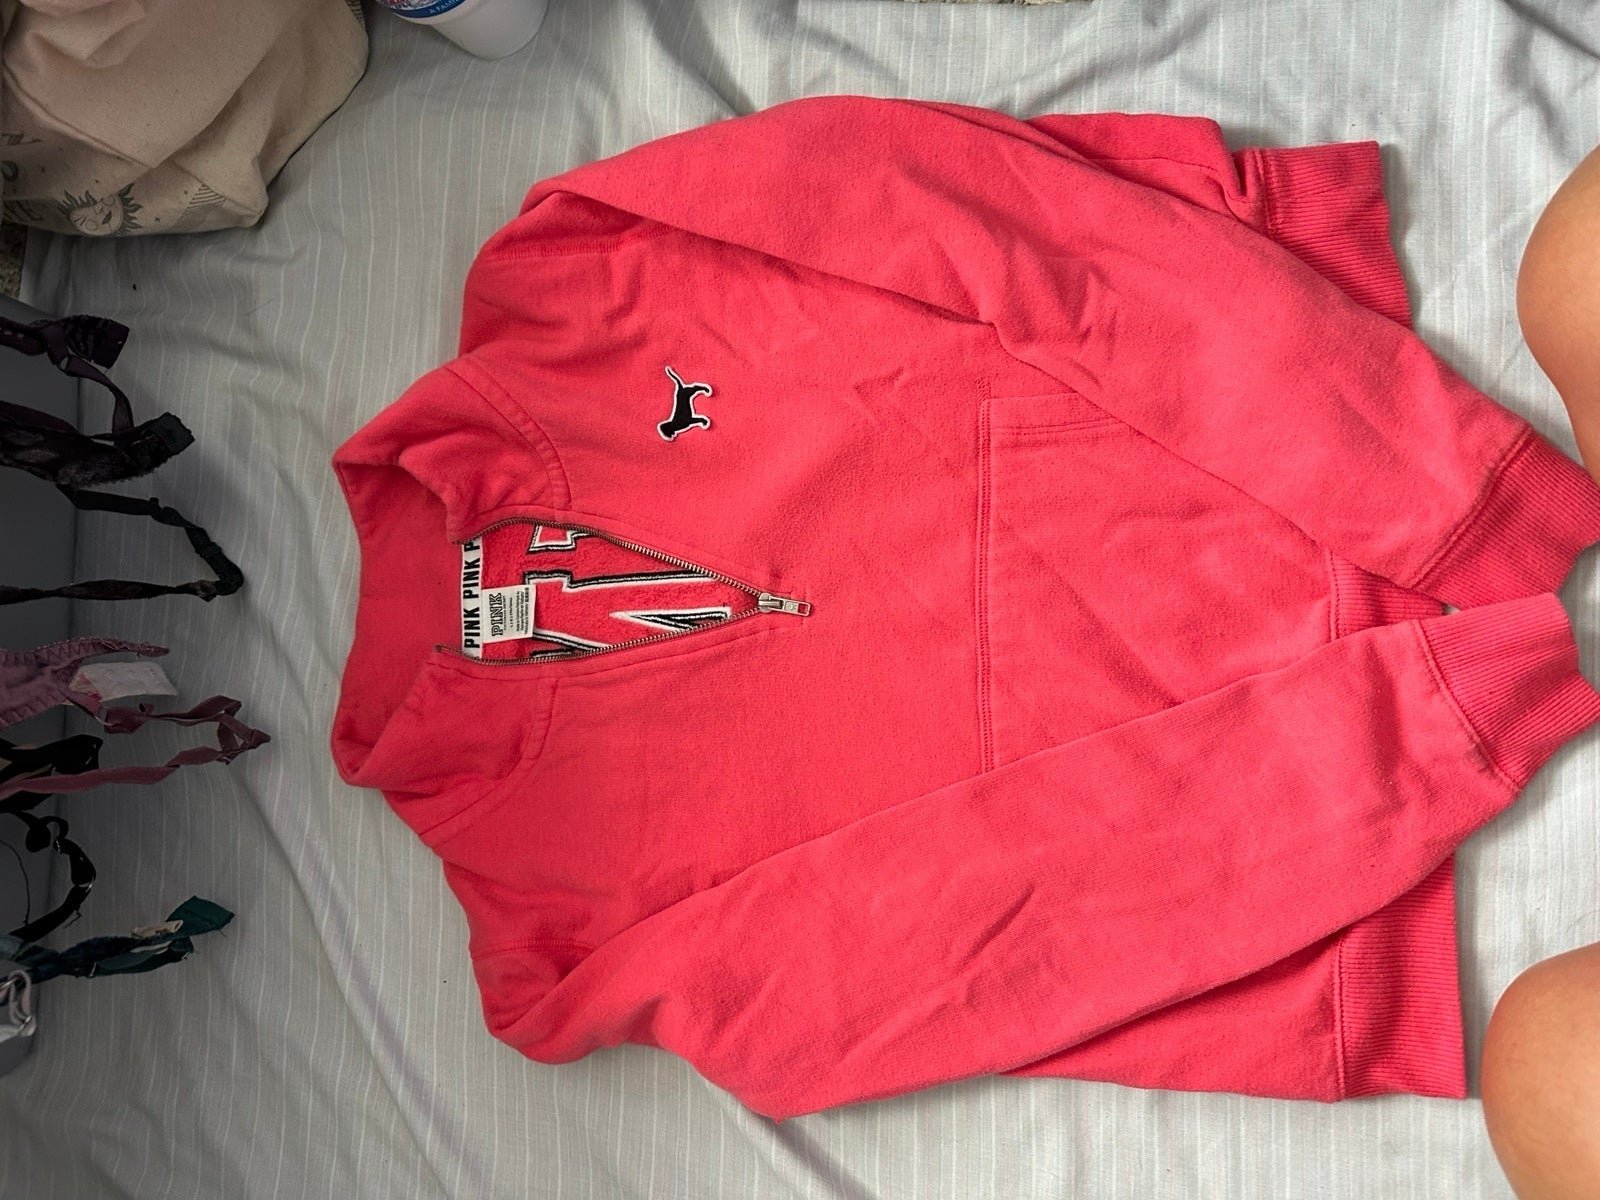 cheapest place to buy  PINK quarter zip k14ctU7Q2 Outlet Store